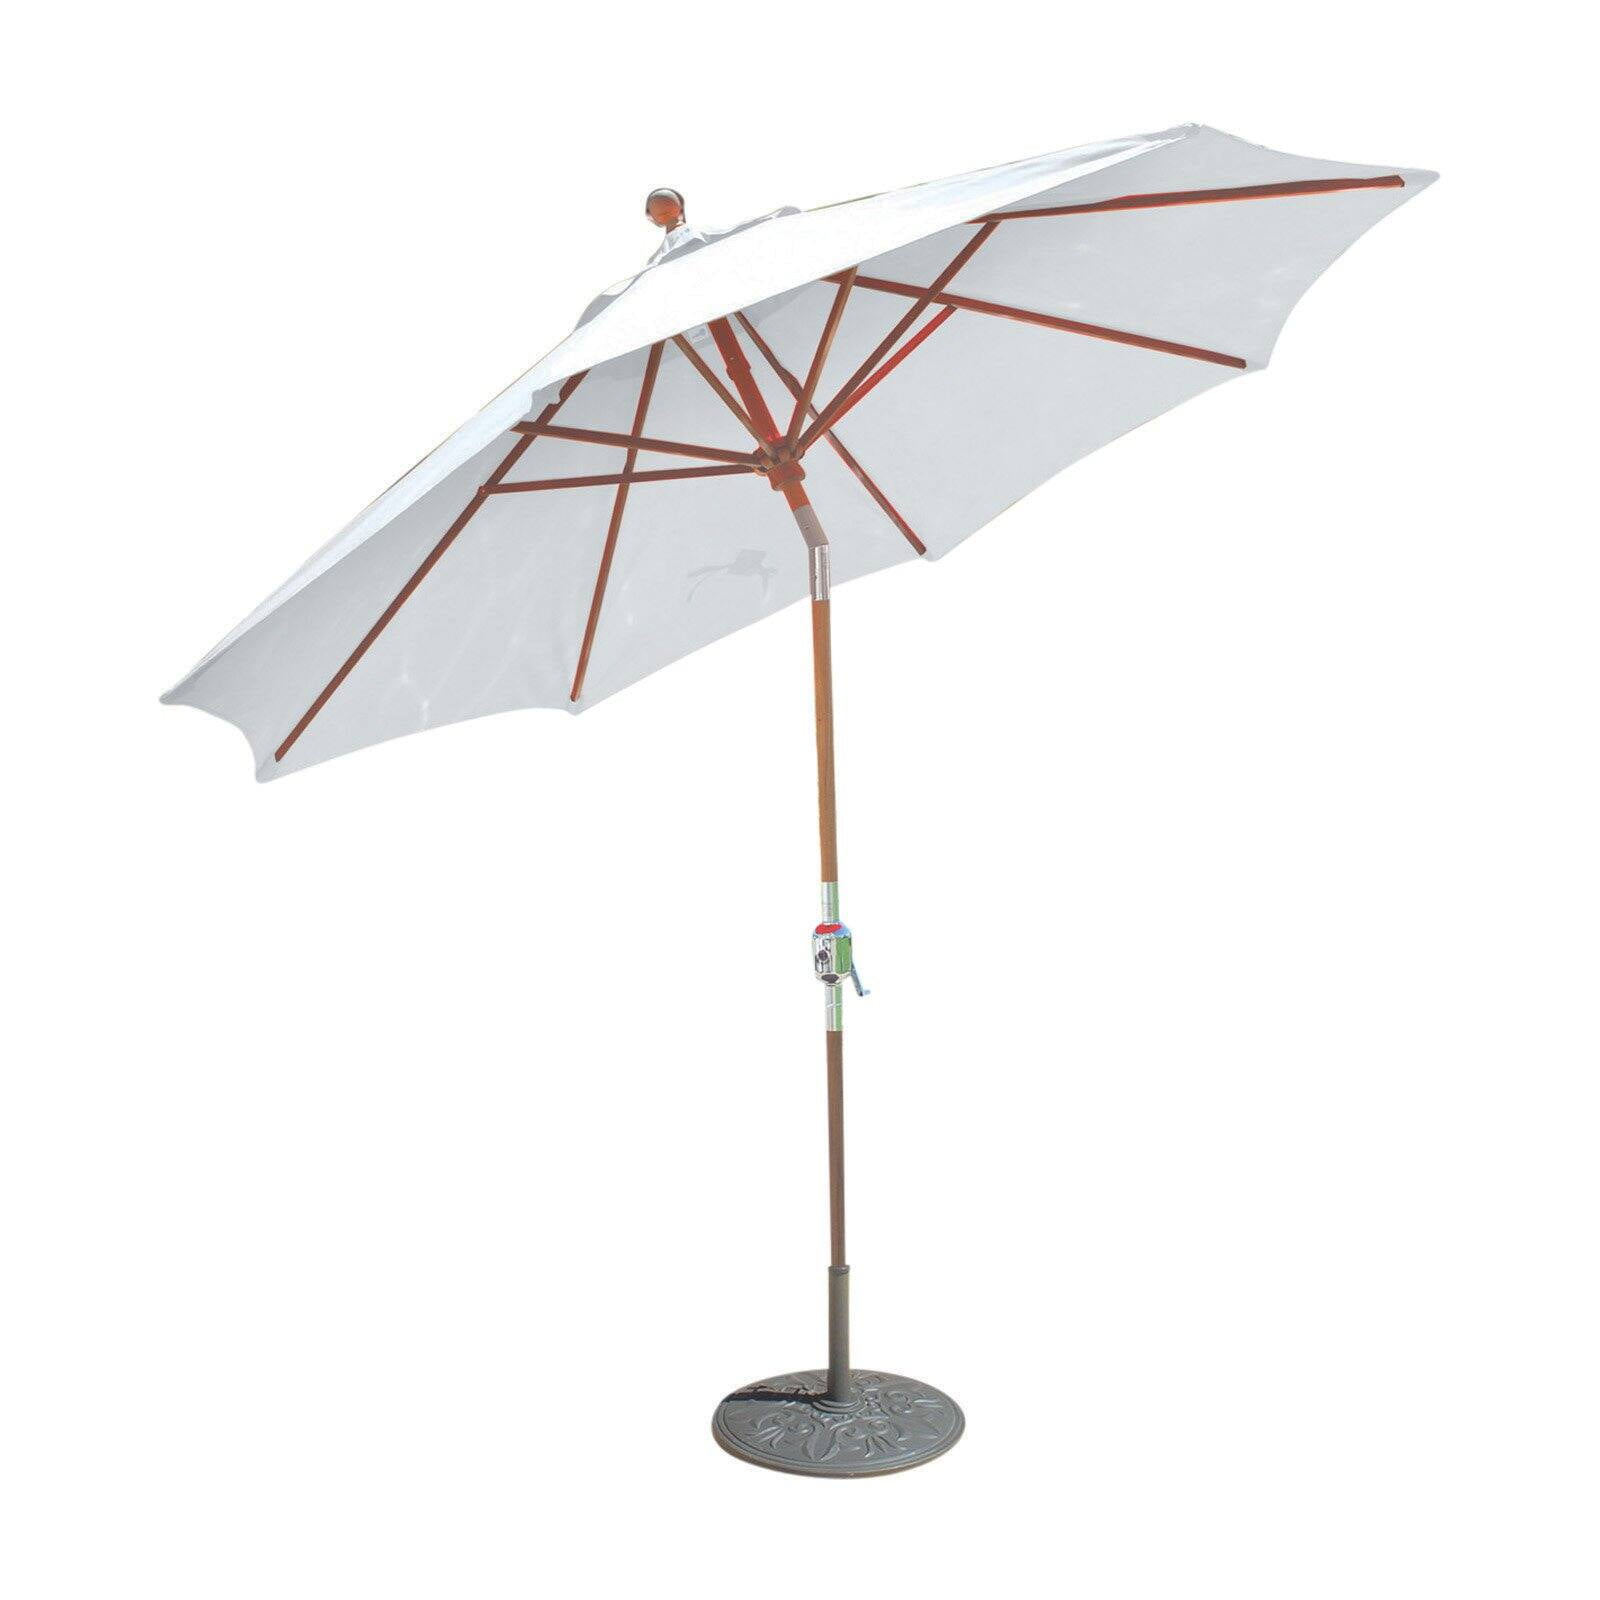 Protect Yourself From The Sun With Teak Patio Umbrellas